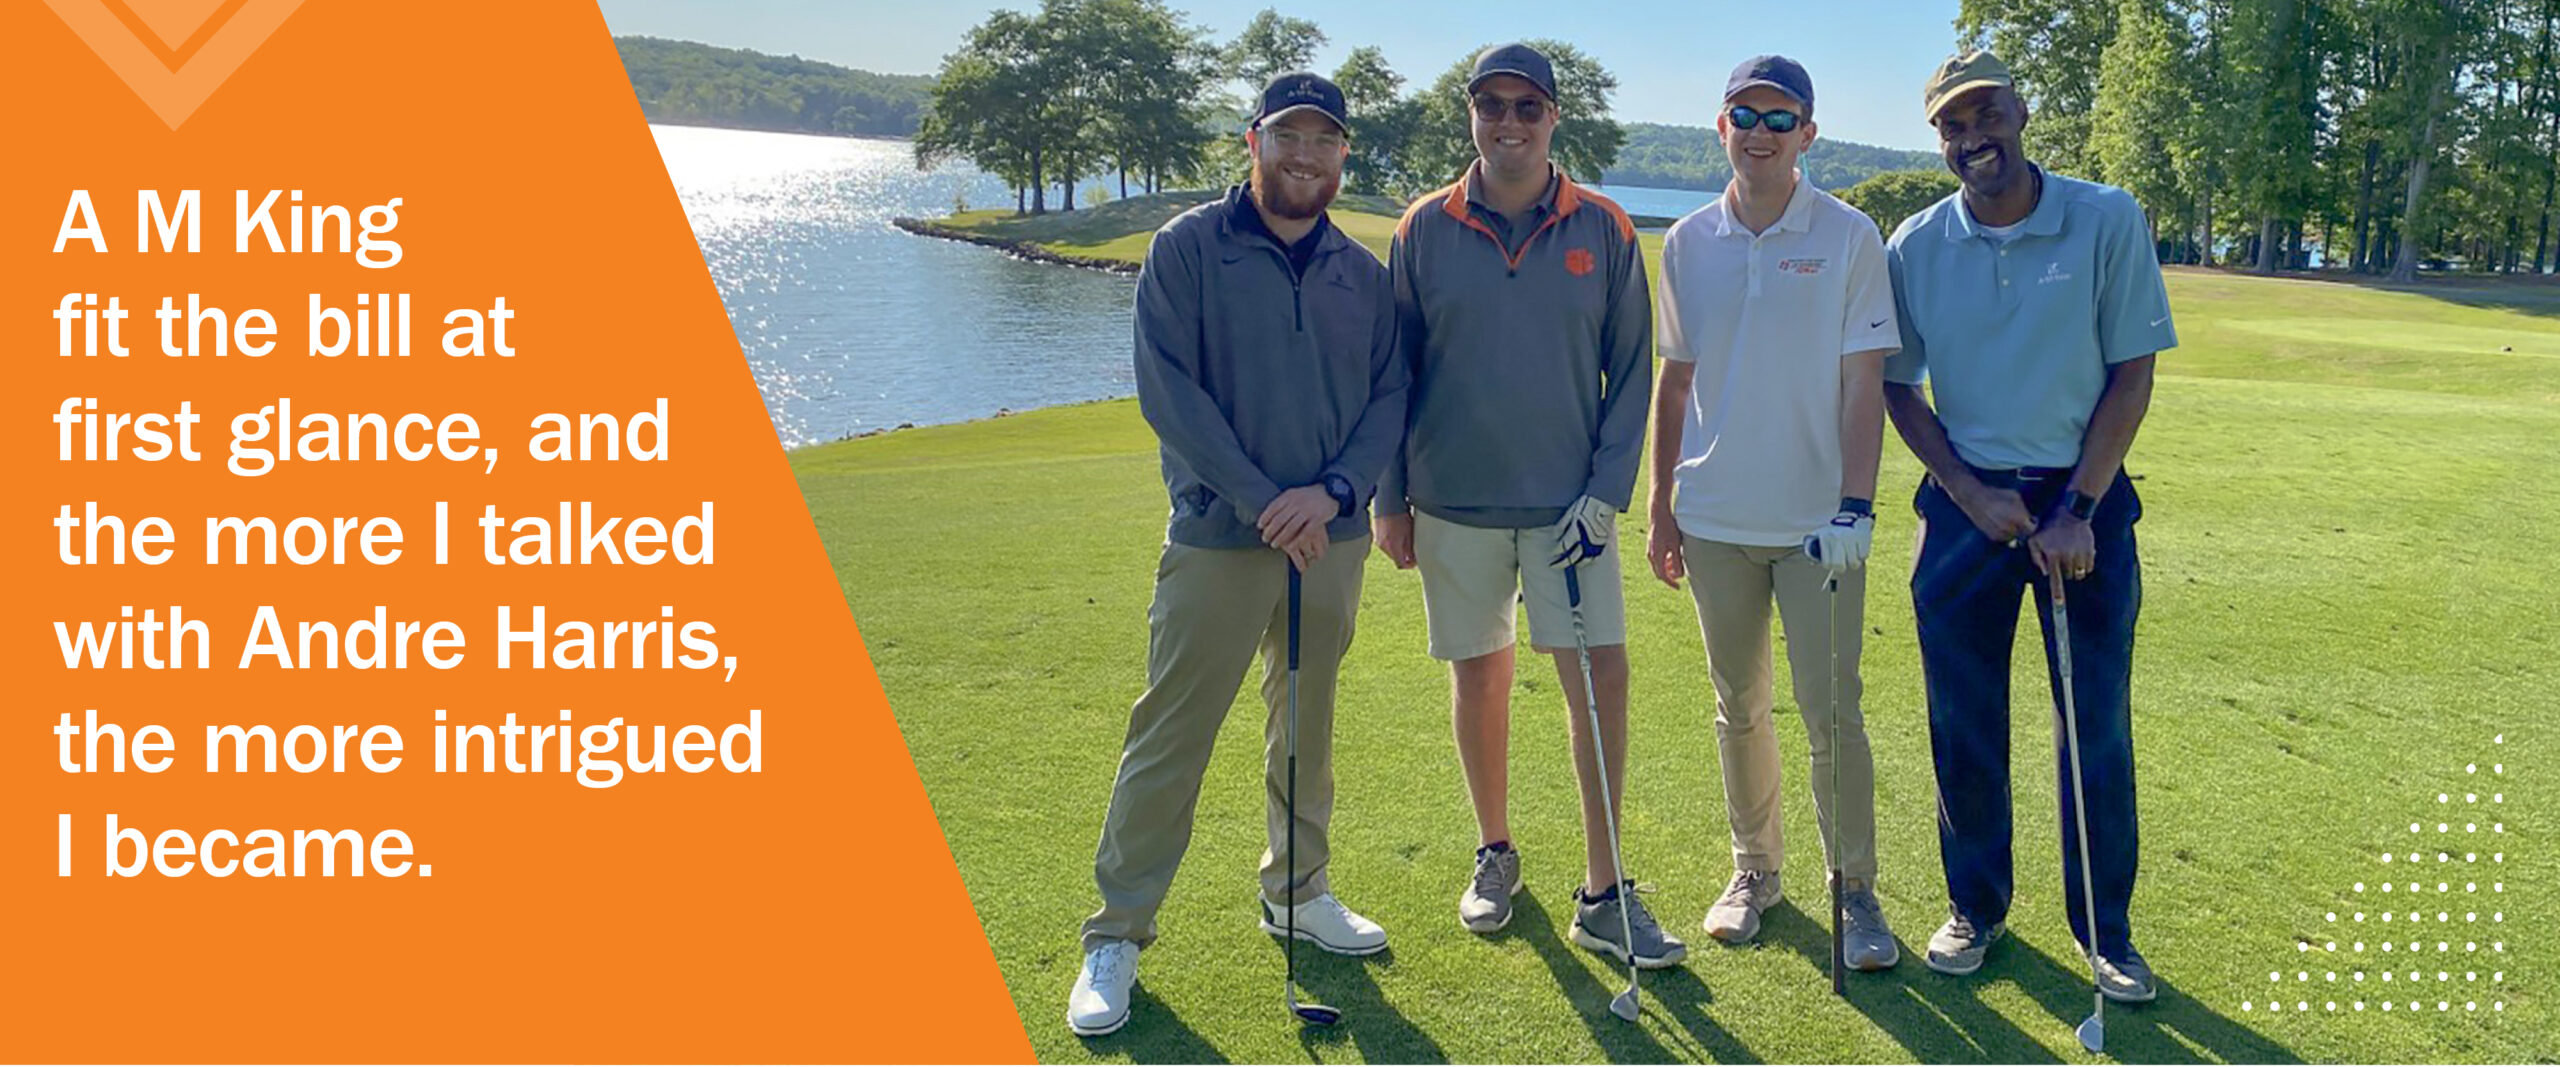 A Promising Career in Design-Build: From Intern to Project Manager. From left to right: Charlie Martin, Matt Worley, Chalmers Reely and Andre Harris.